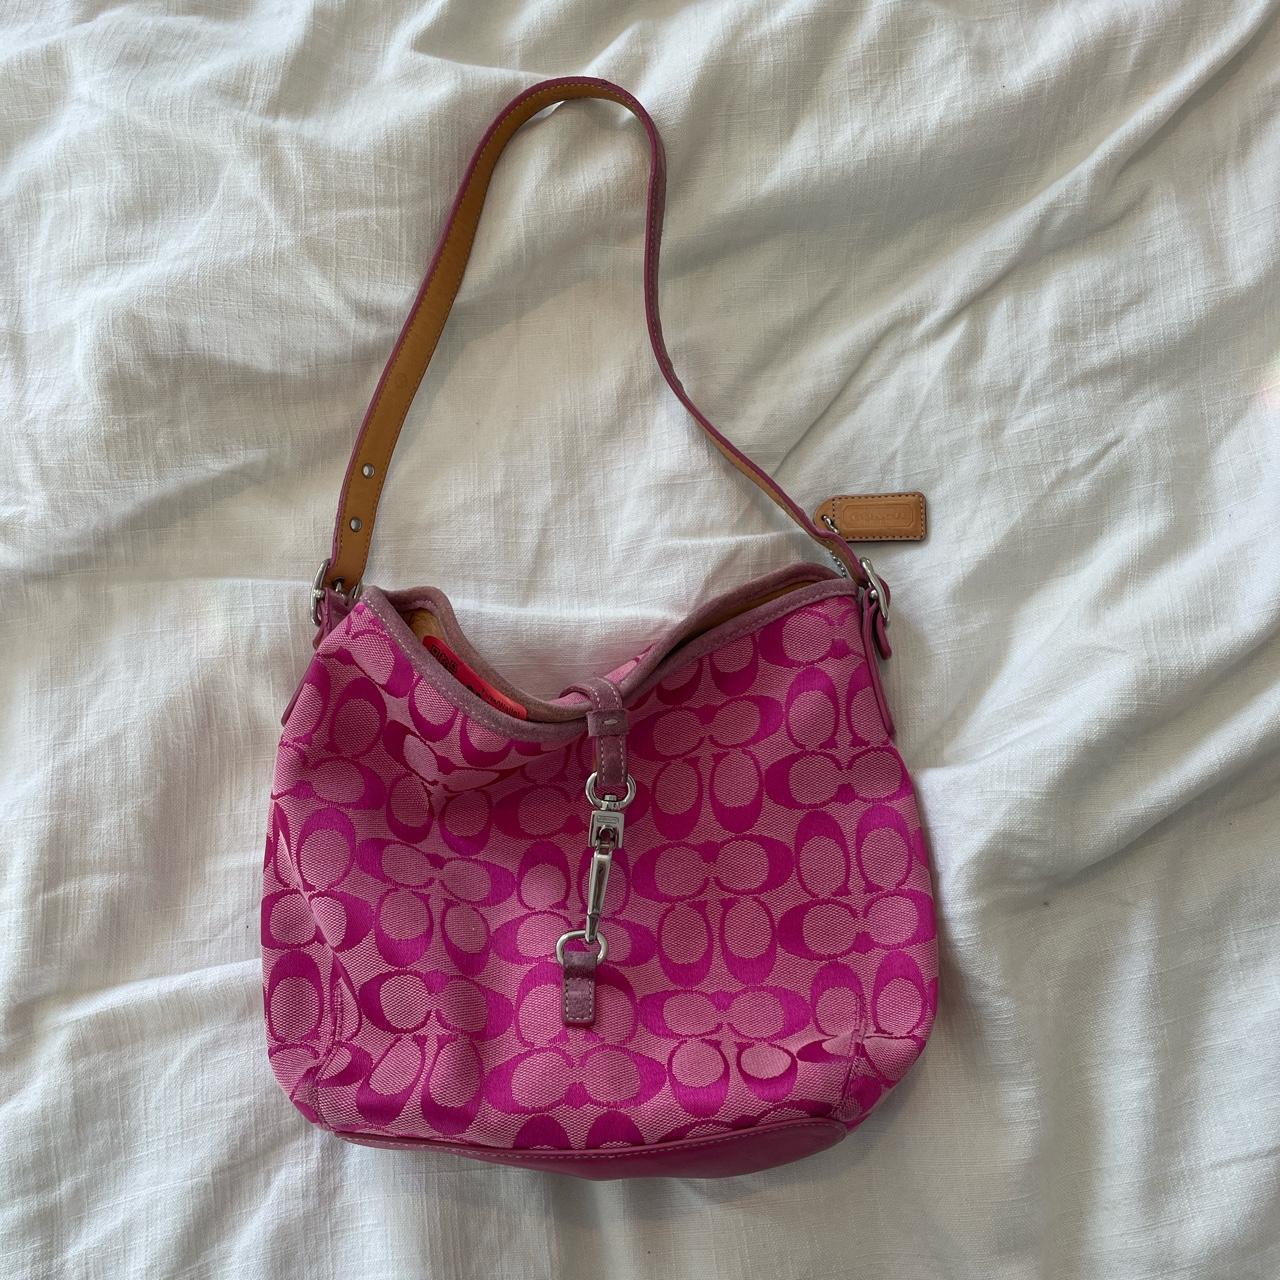 Coach NWT Signature Maggie Shoulder Bag w/matching Wallet | Leopard print  handbags, Pink coach purses, Brown leather hobo